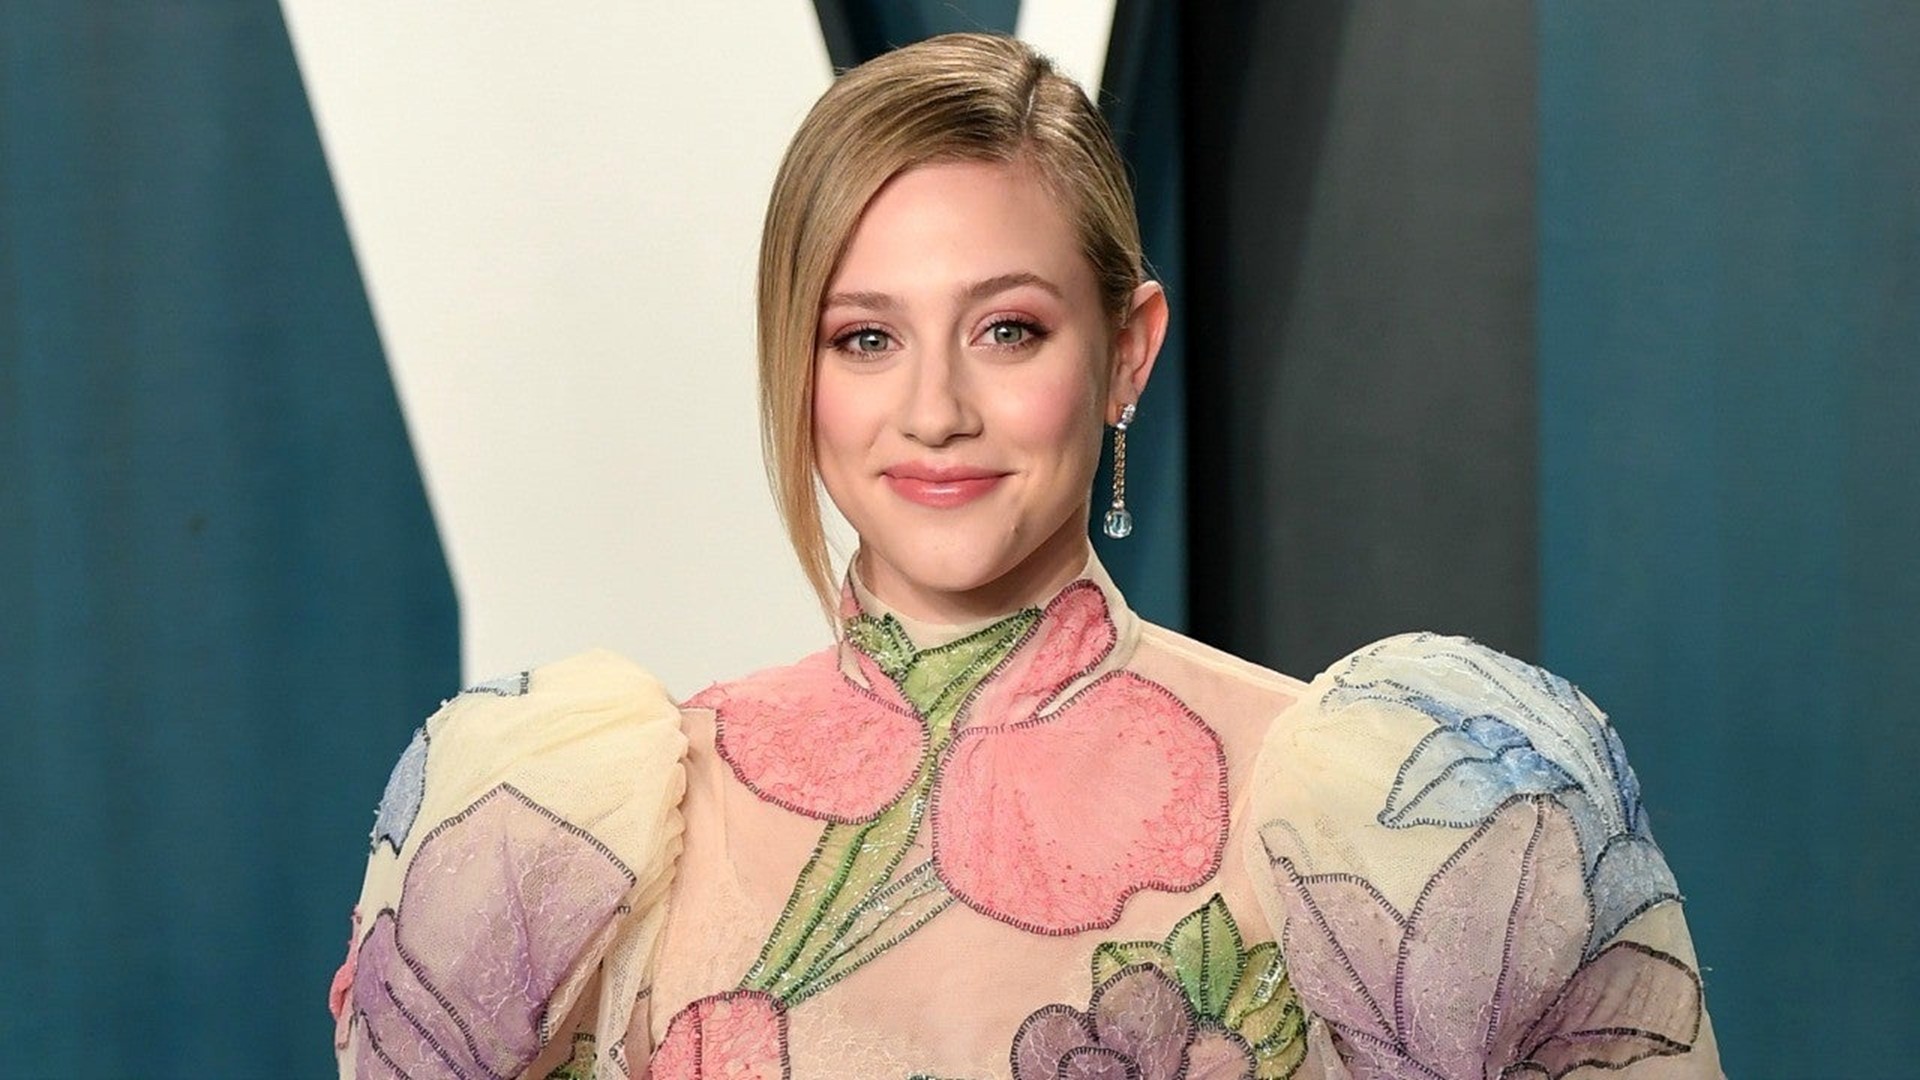 Lili Reinhart Says She Did A Bra Scene On Riverdale To Help Others With Body Positivity 